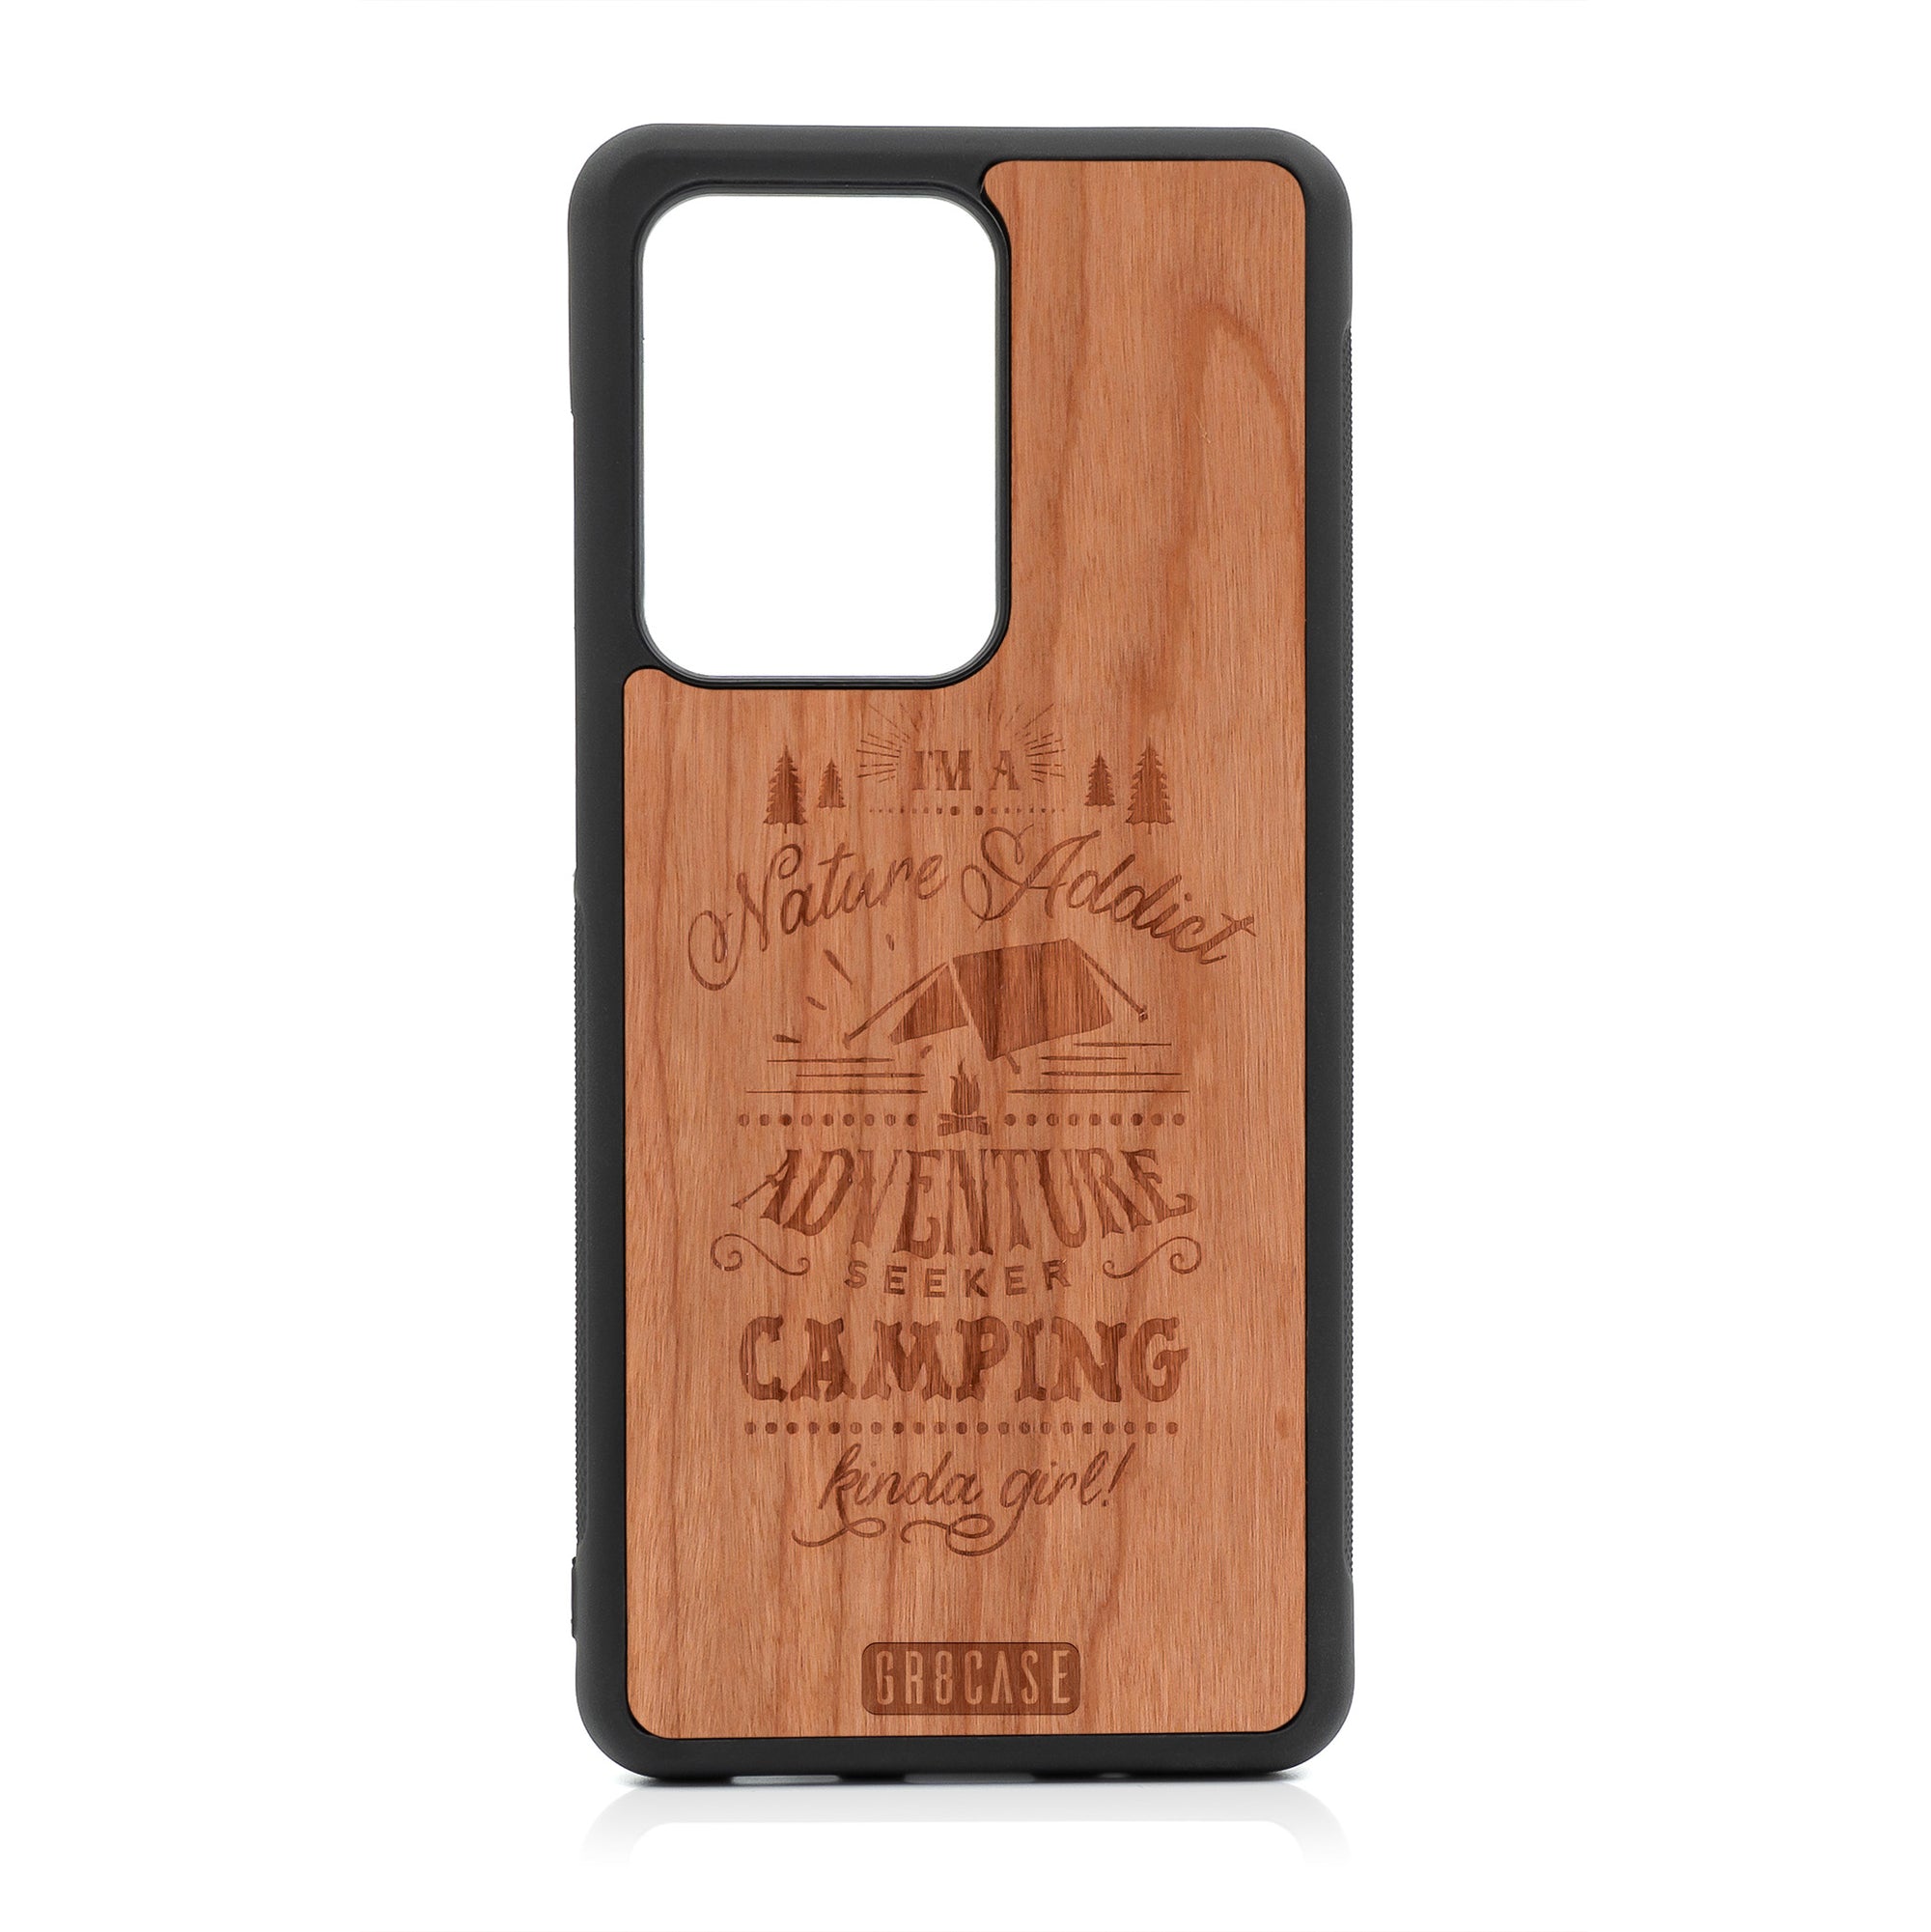 I'm A Nature Addict Adventure Seeker Camping Kinda Girl Design Wood Case For Samsung Galaxy S20 Ultra by GR8CASE